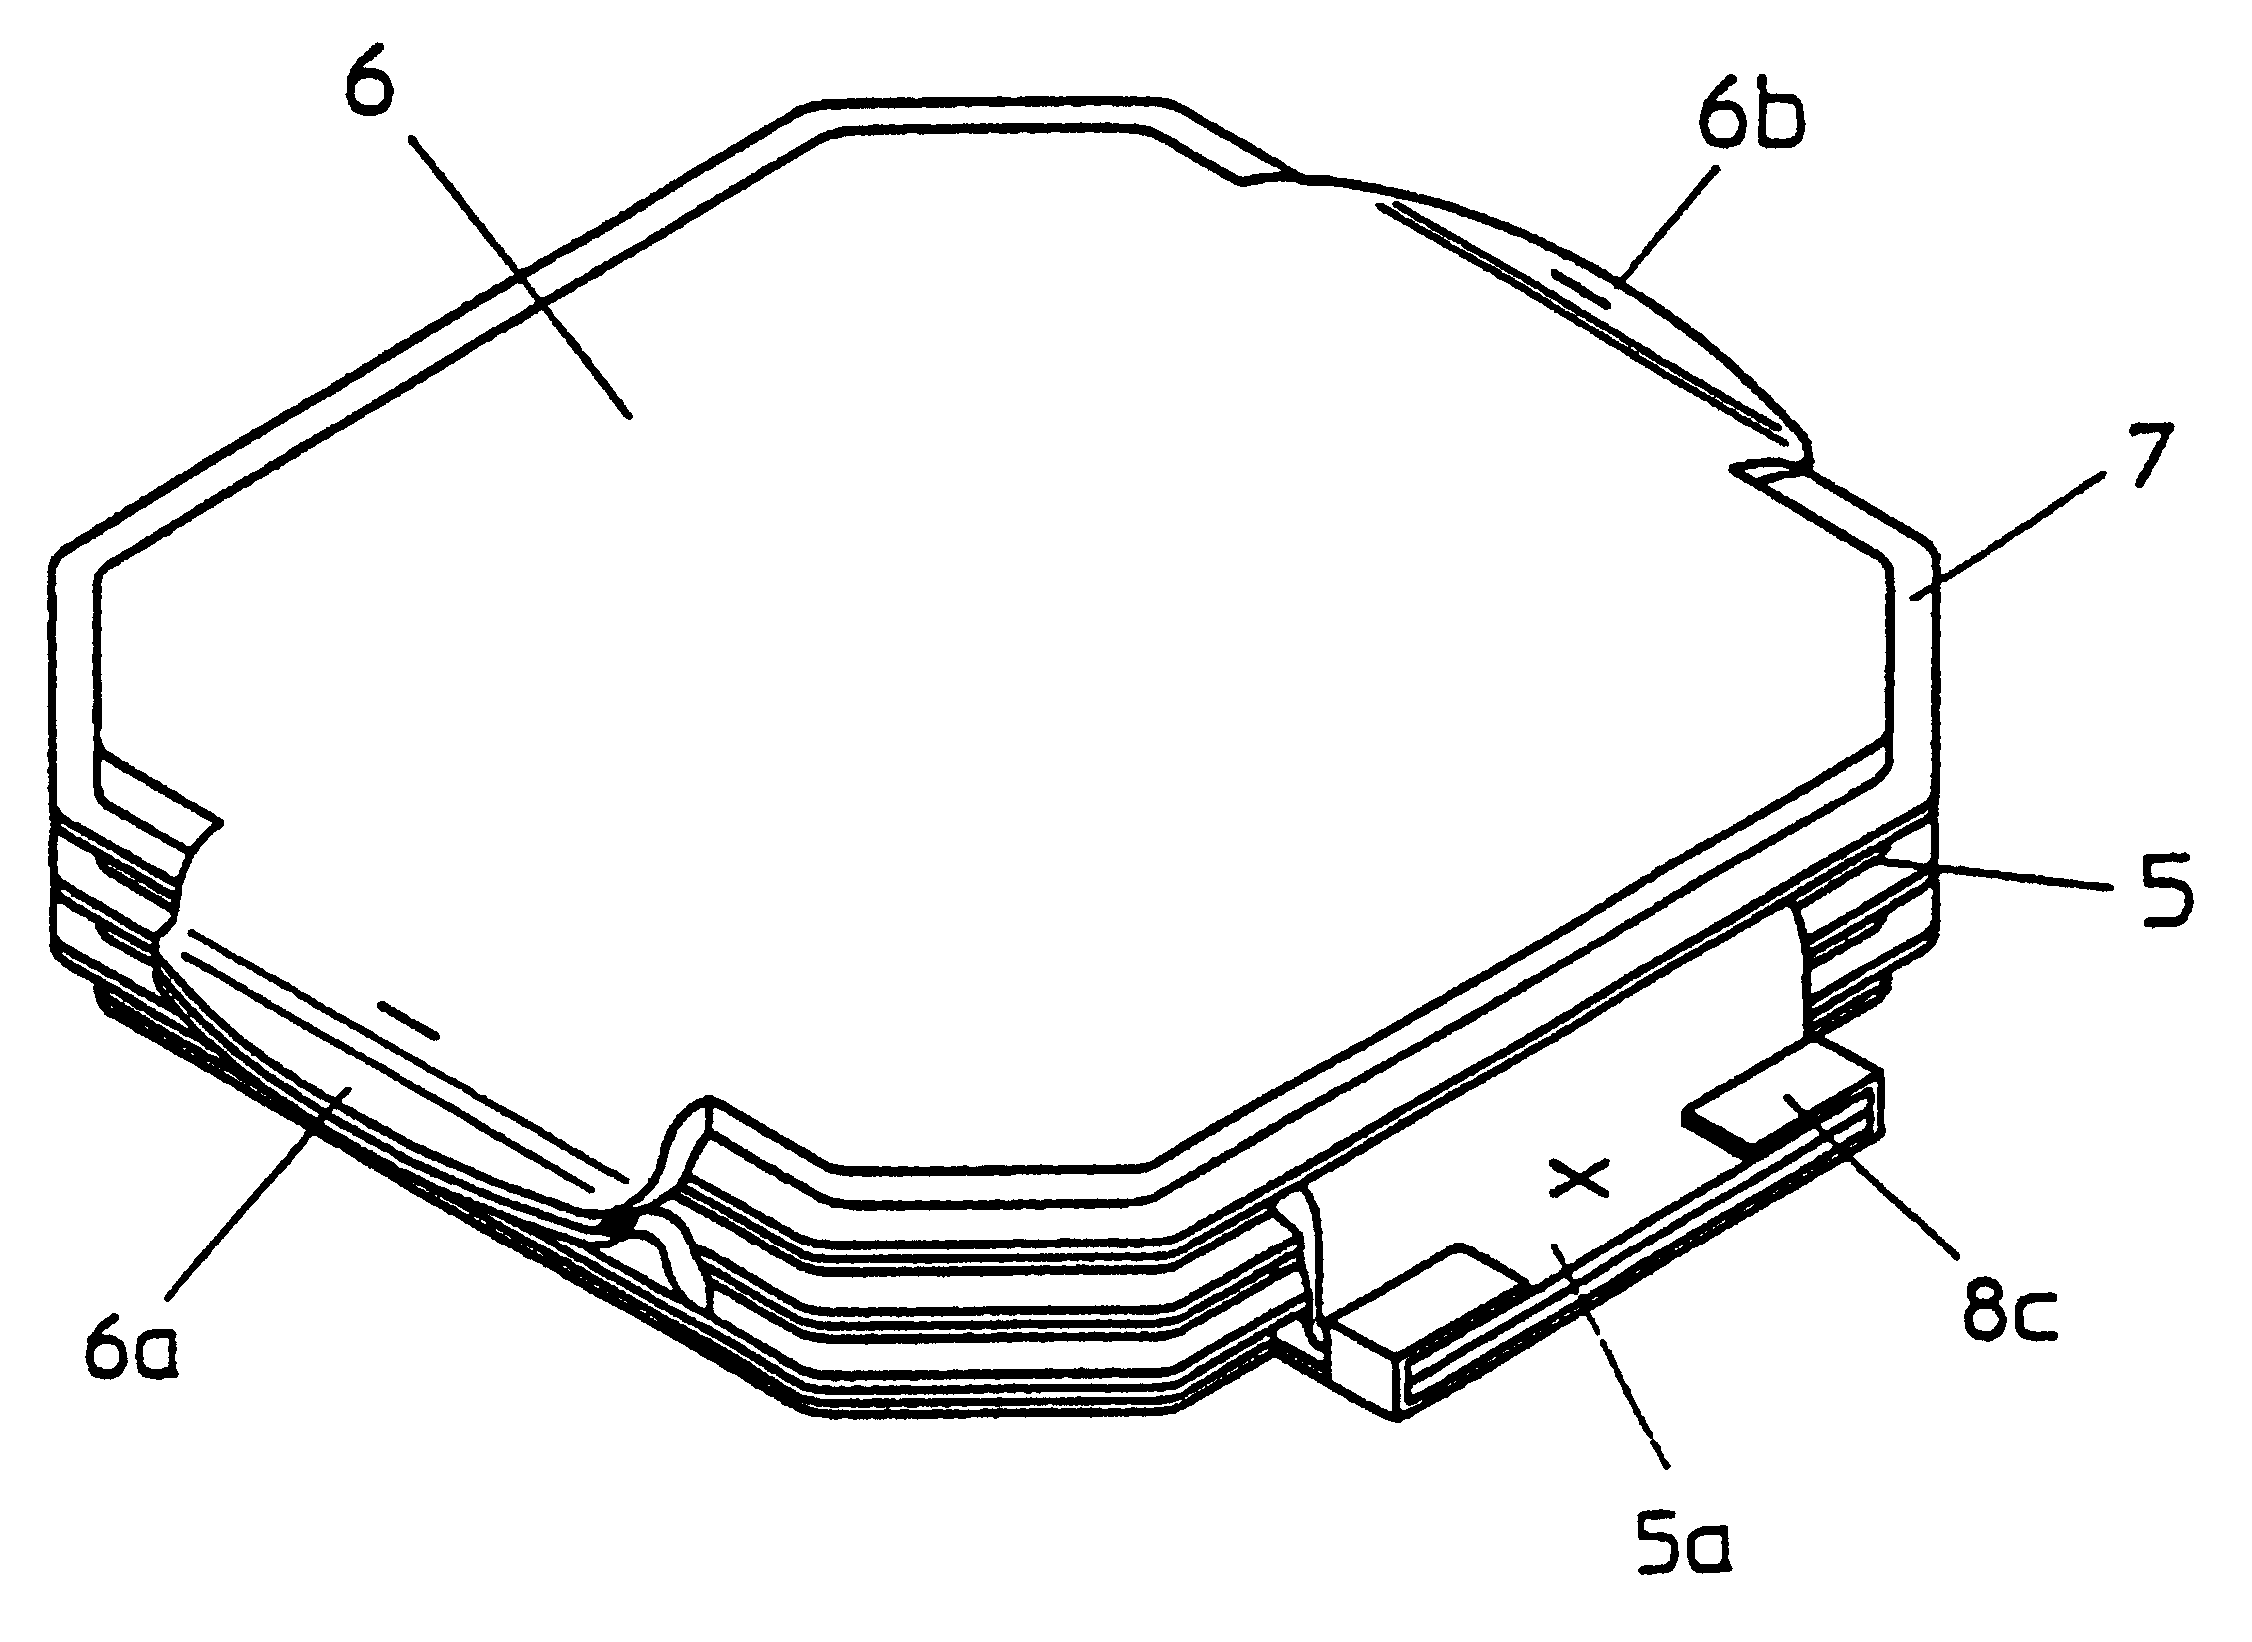 Electrical rechargeable battery in the form of a button cell